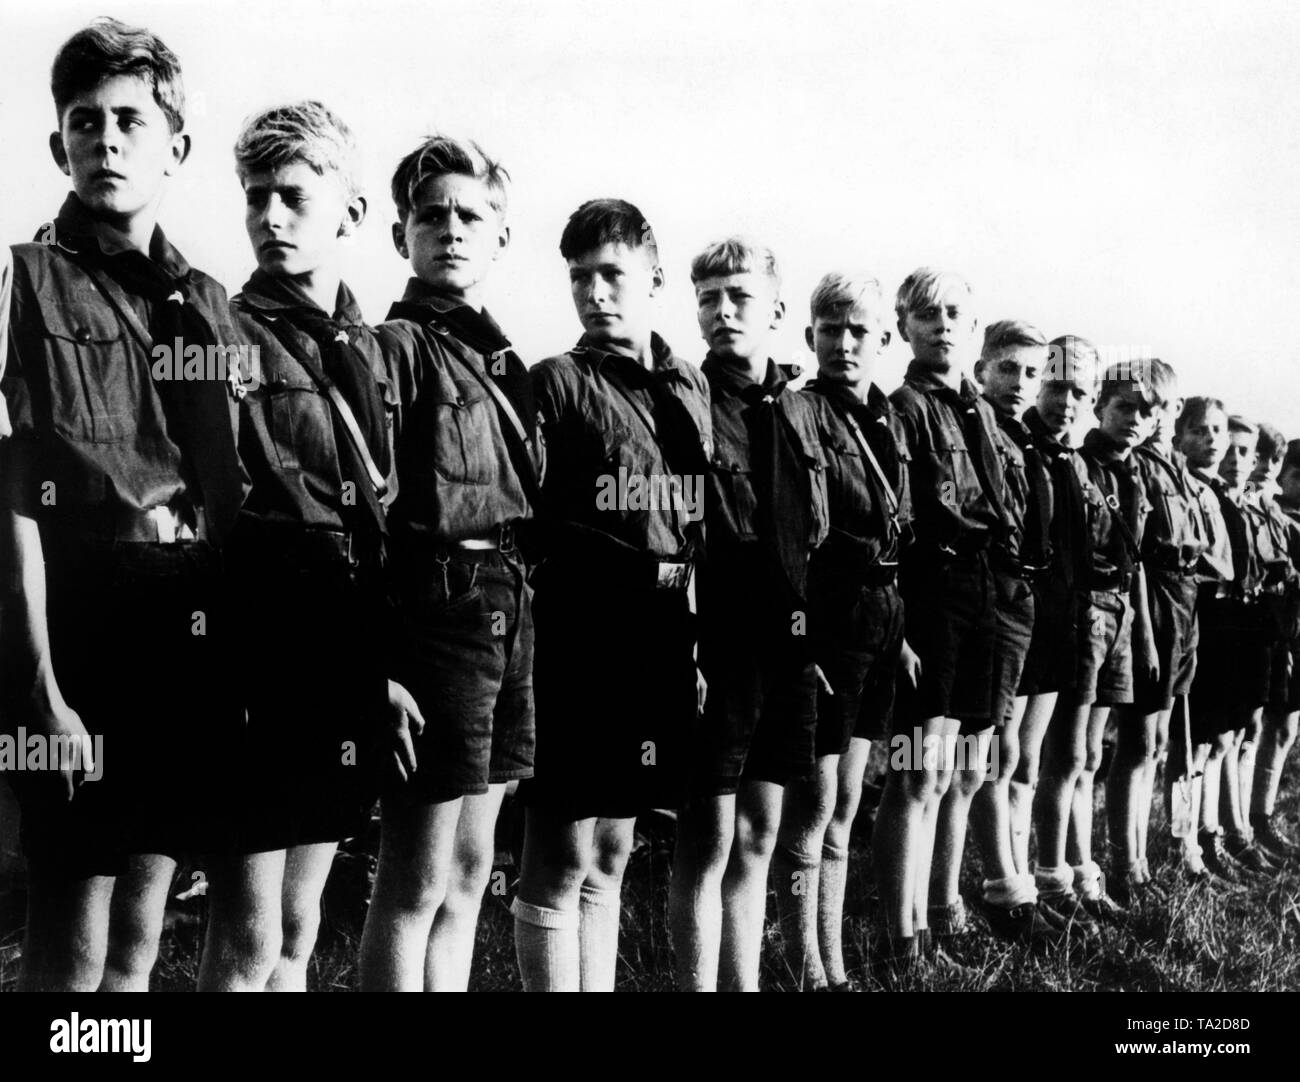 The first members of the Deutsches Jungvolk are standing in line in 1933. They are wearing their new uniforms: brown shirts, black truncheons and the lightning symbol on the belt buckle. Stock Photo